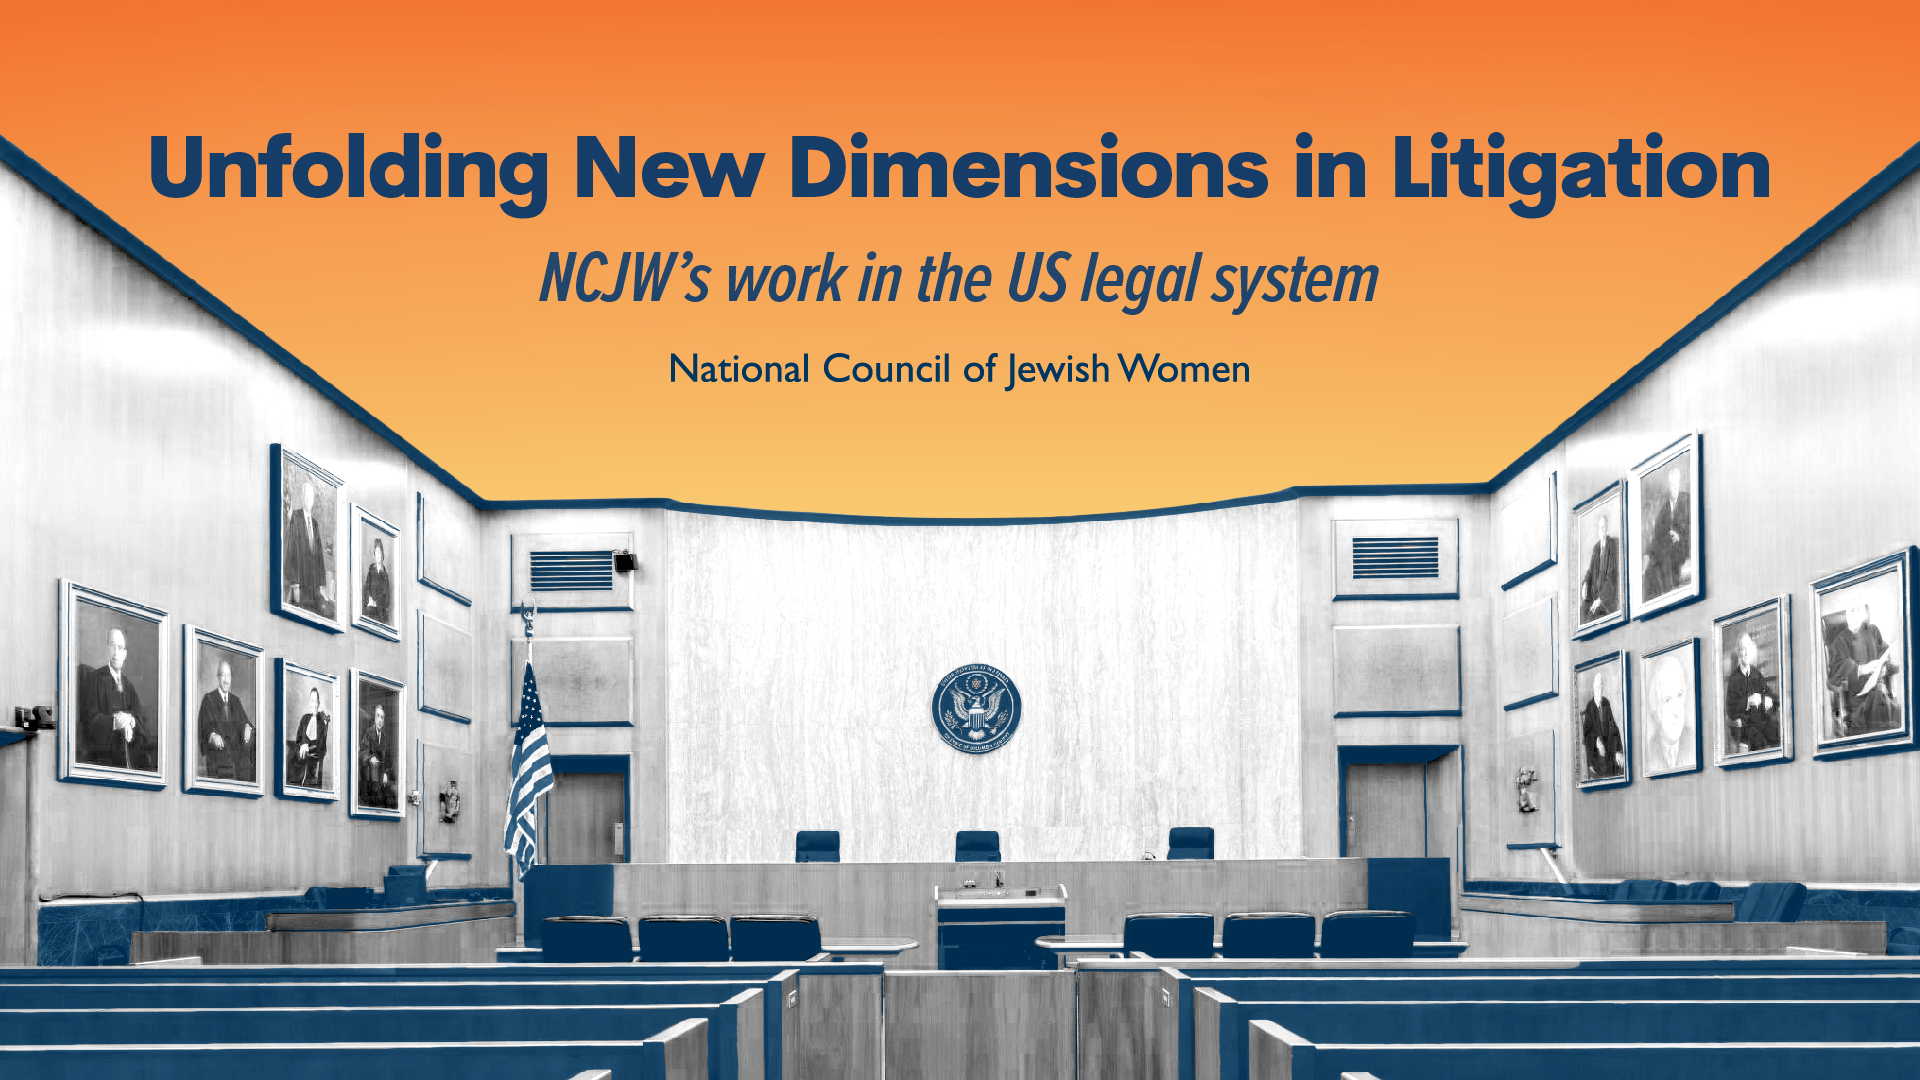 Image of courtroom with text reading: Unfolding new dimensions in litigation. NCJW's work in the US legal system. National Council of Jewish Women. 